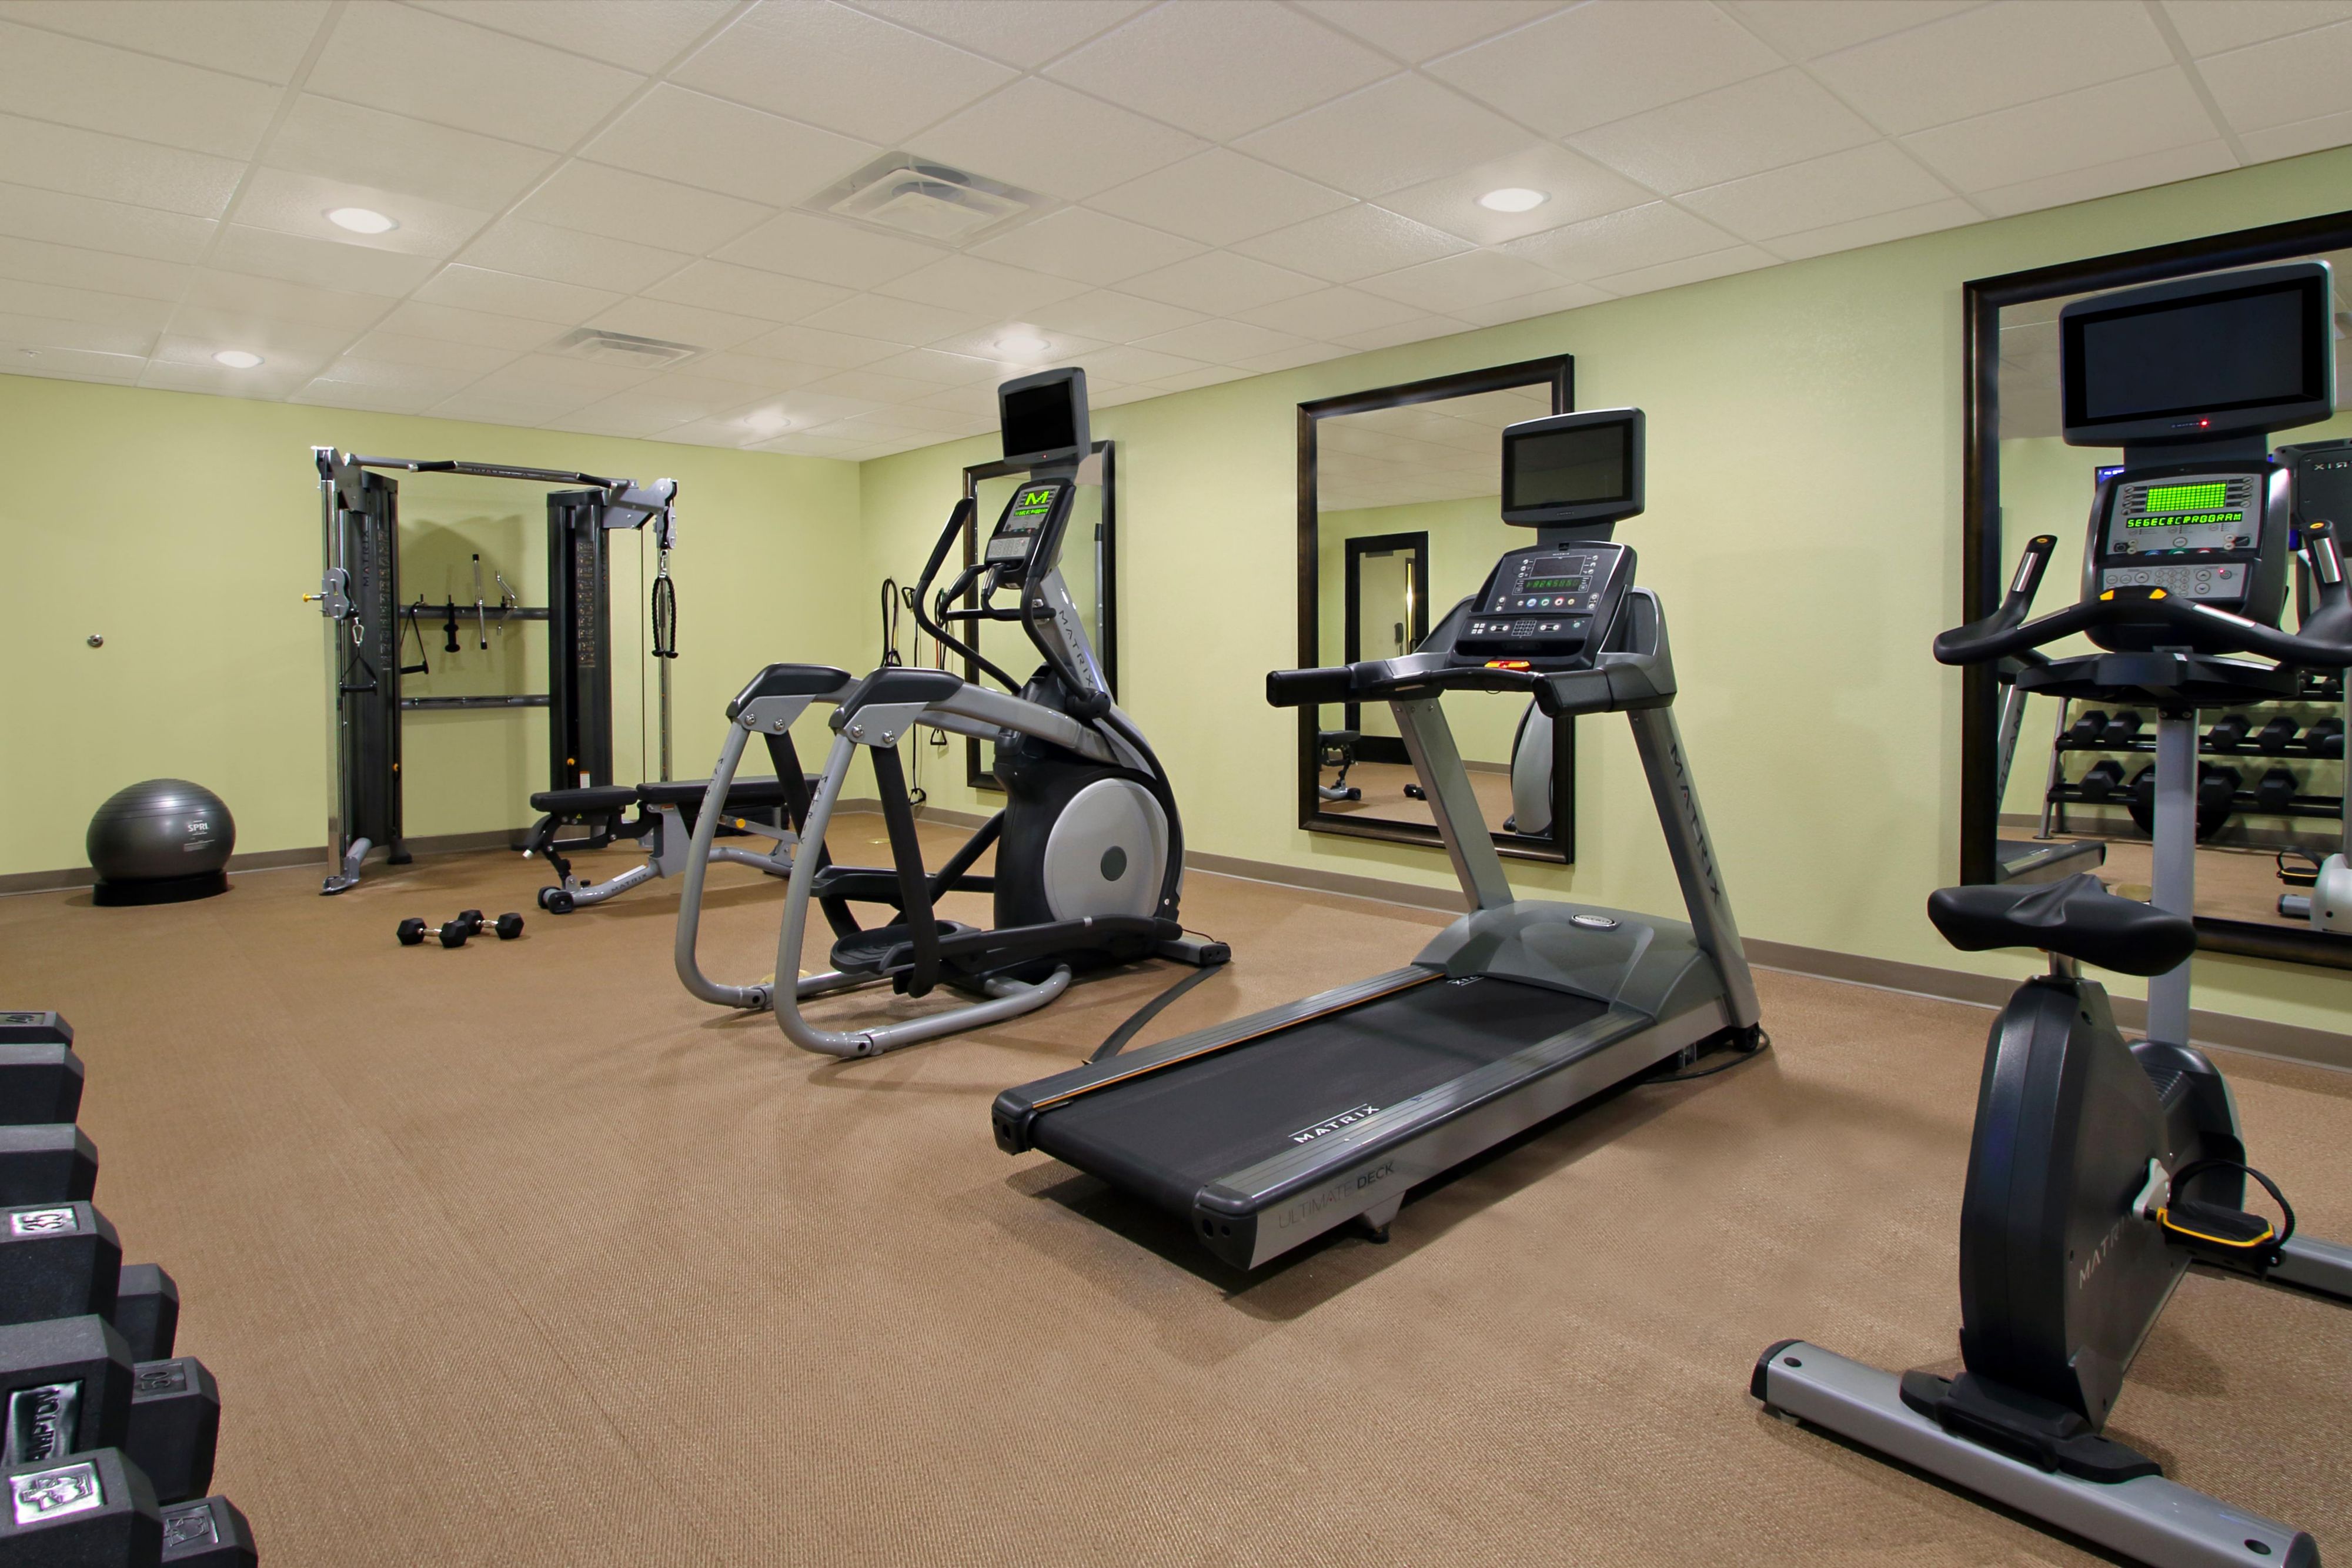 The Fitness Room is an expansive, fully equipped exercise center adjacent to the Laundry room, so you can get a run in while you brighten your whites.